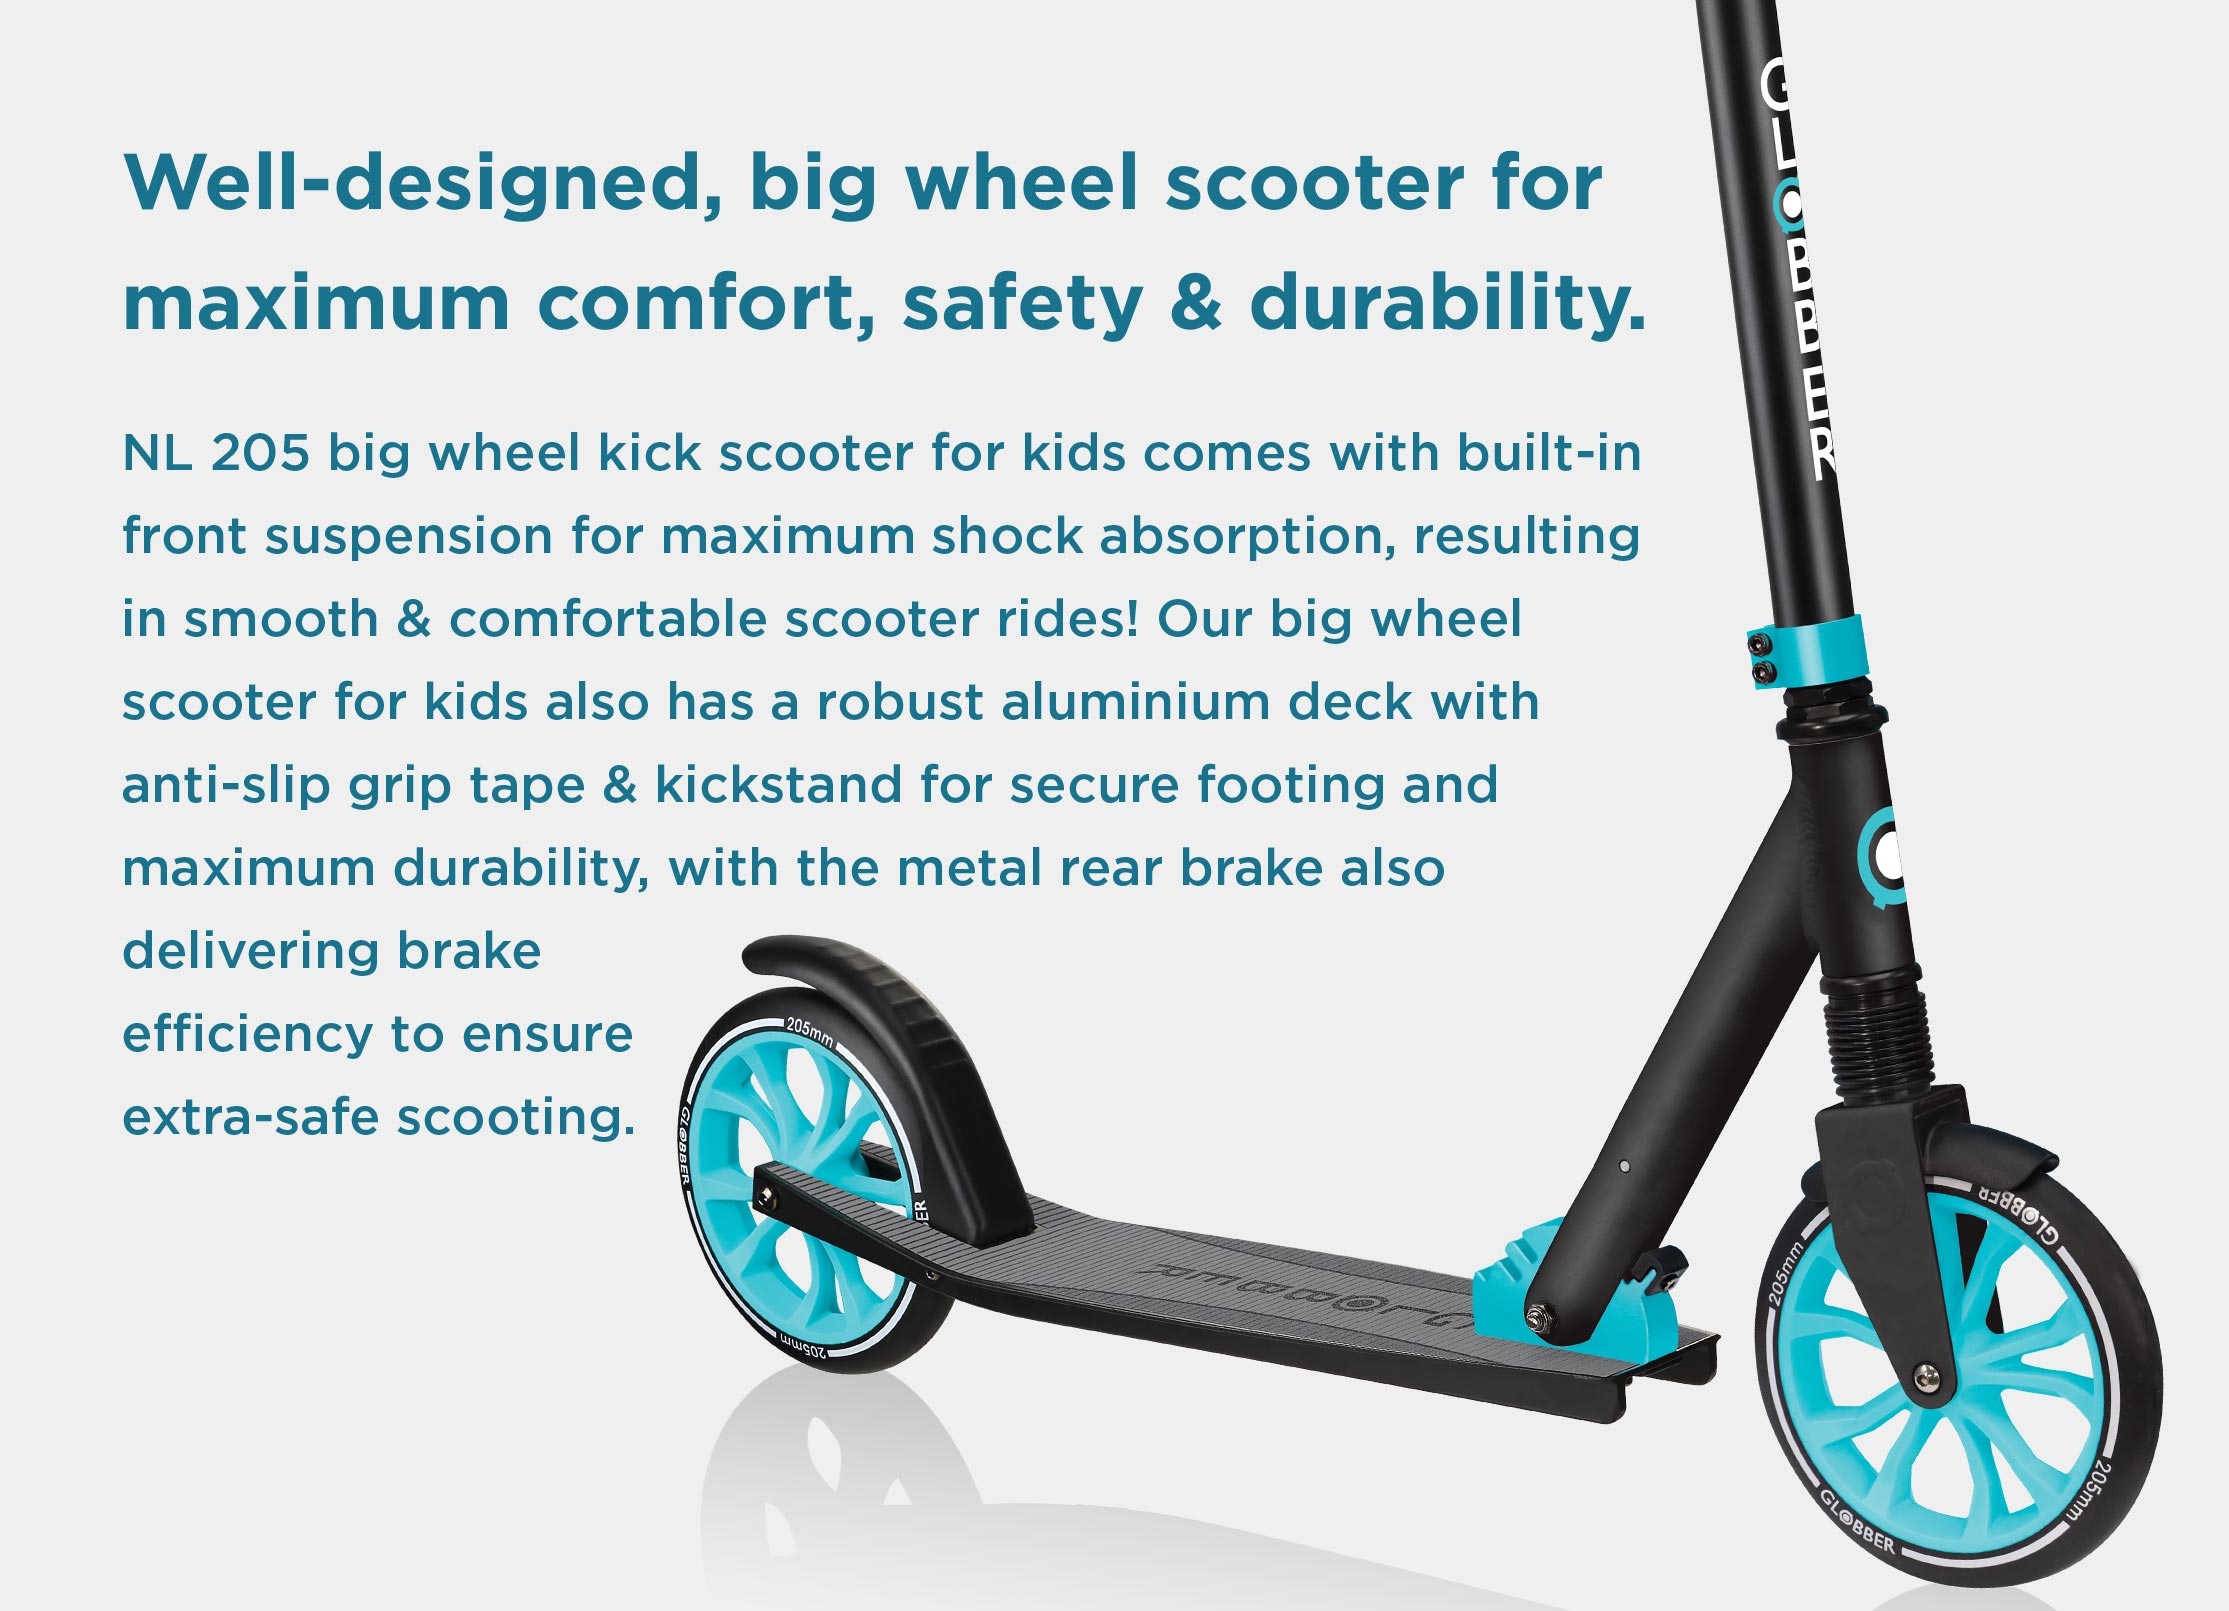 Big wheel scooter for 8 year olds+ designed for maximum comfort, durability and safety